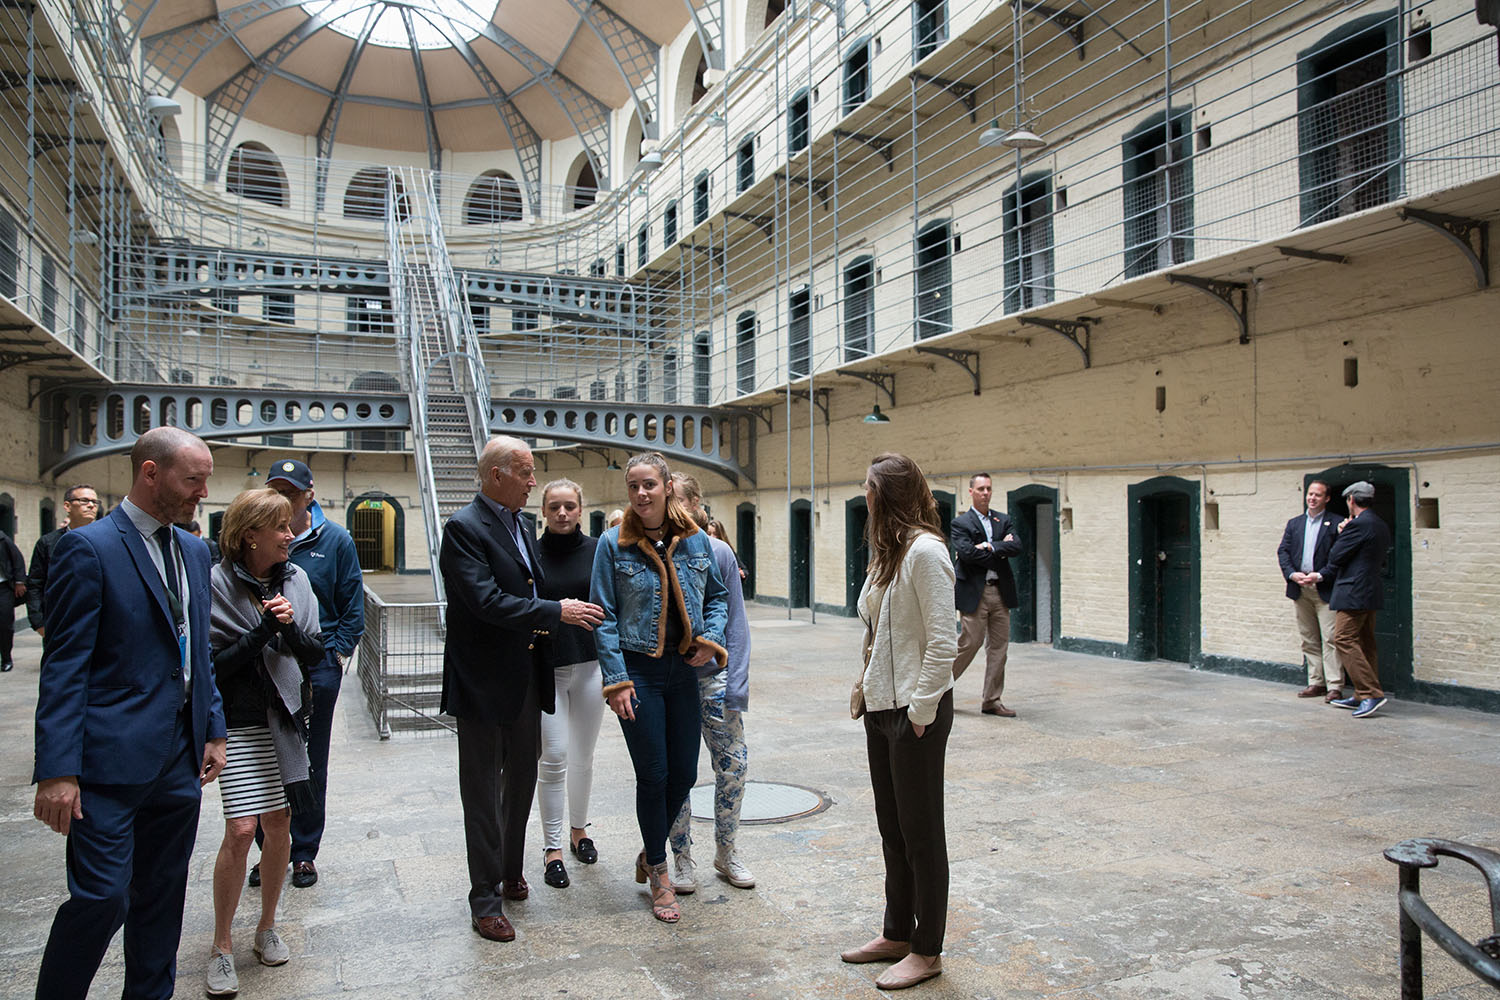 Vice President Joe Biden tours the Kilmainham Prison, where many of those who participated in the Easter Rising in 1916 were held, in Dublin, Ireland, June 23, 2016. (Official White House Photo by David Lienemann)